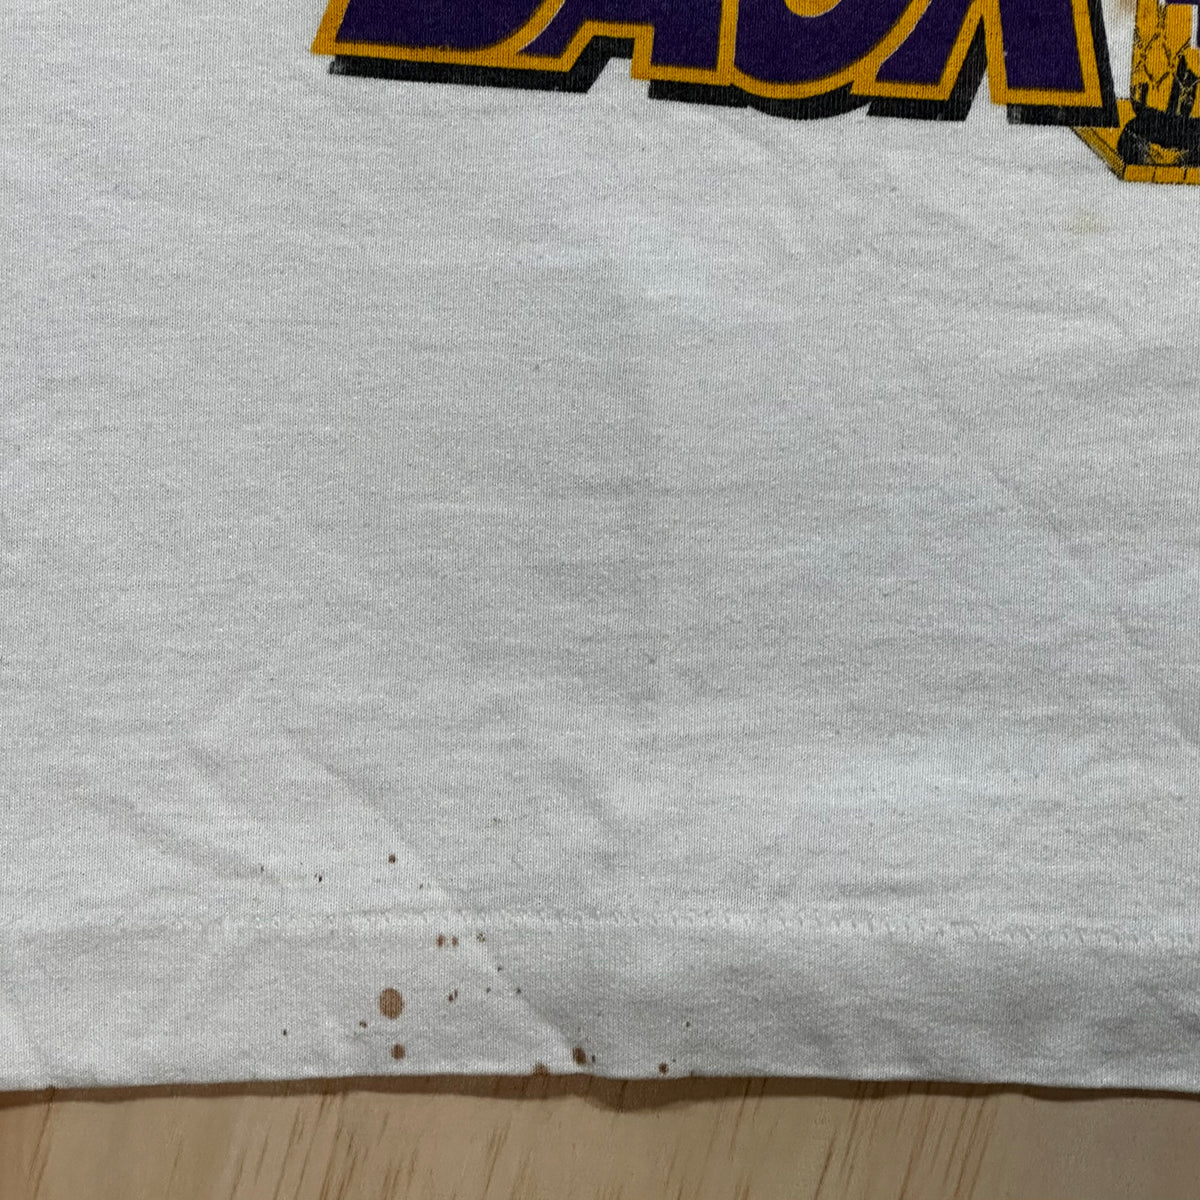 1987-1988 Los Angeles Lakers World Champions Back to Back t-shirt